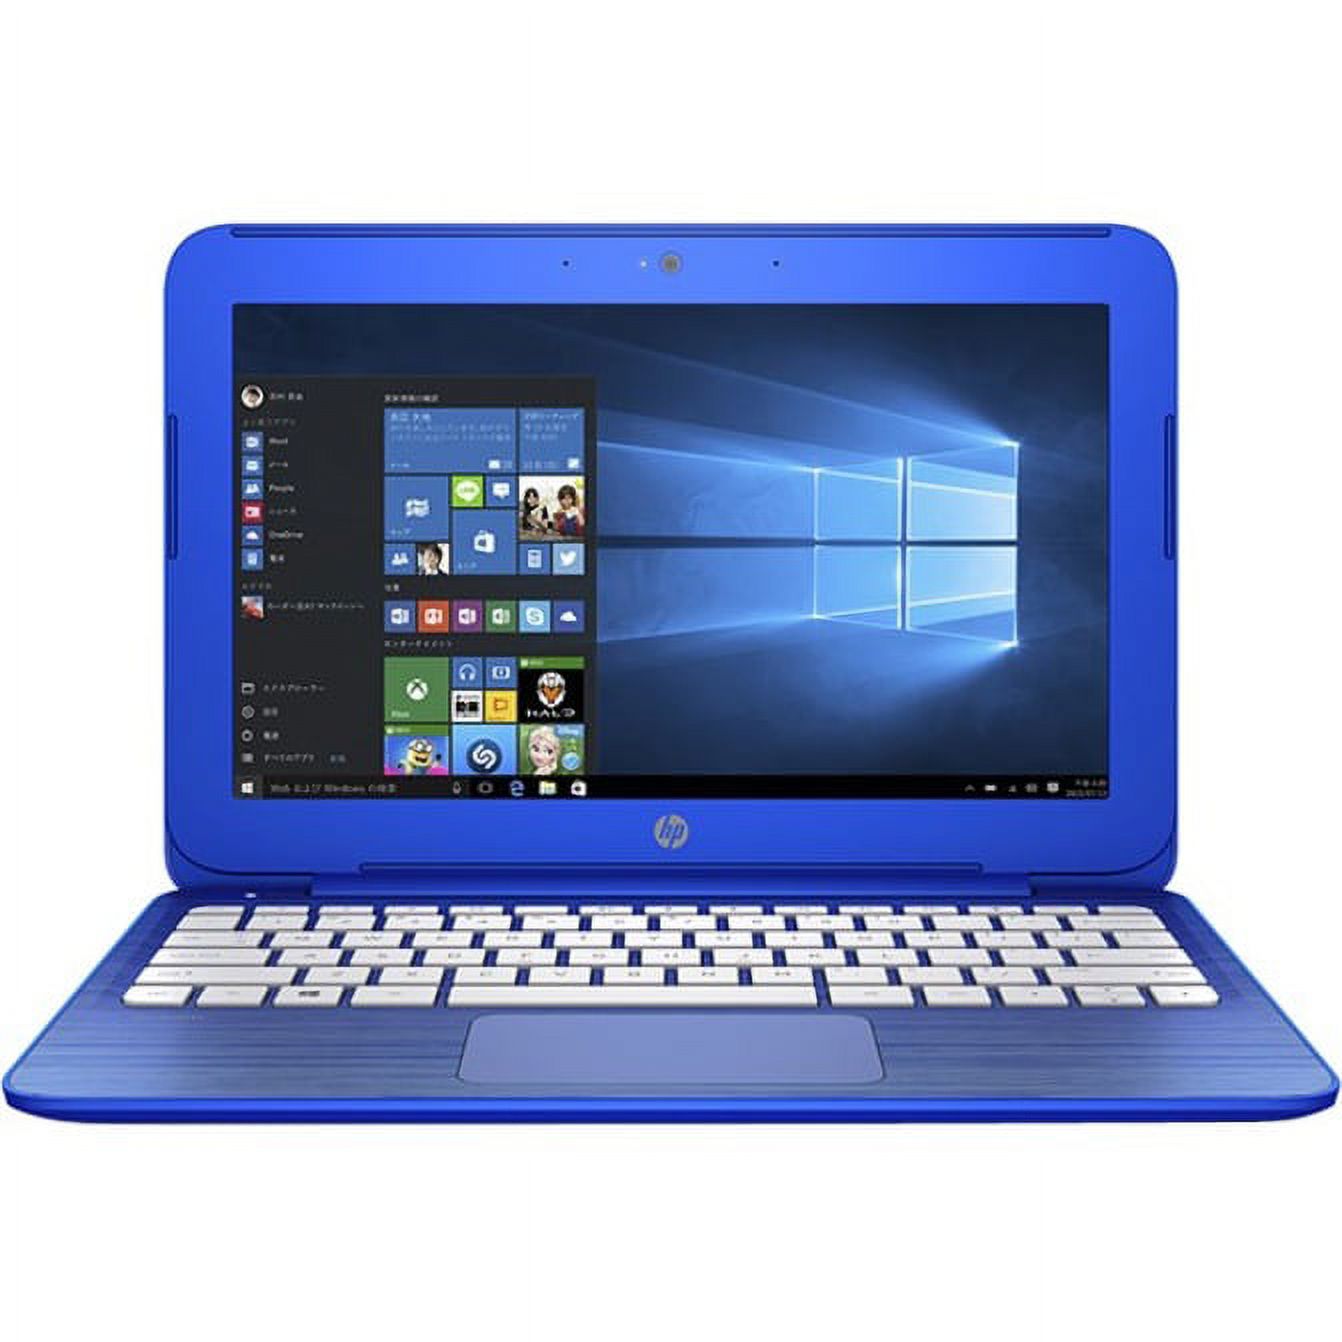 HP 11.6" 11-r014wm Stream Laptop PC, Windows 10 Home, Office 365 Personal 1 year subscription included, Intel Celeron N3050 Dual-Core Processor, 2GB Memory, 32GB Hard Drive - image 3 of 6